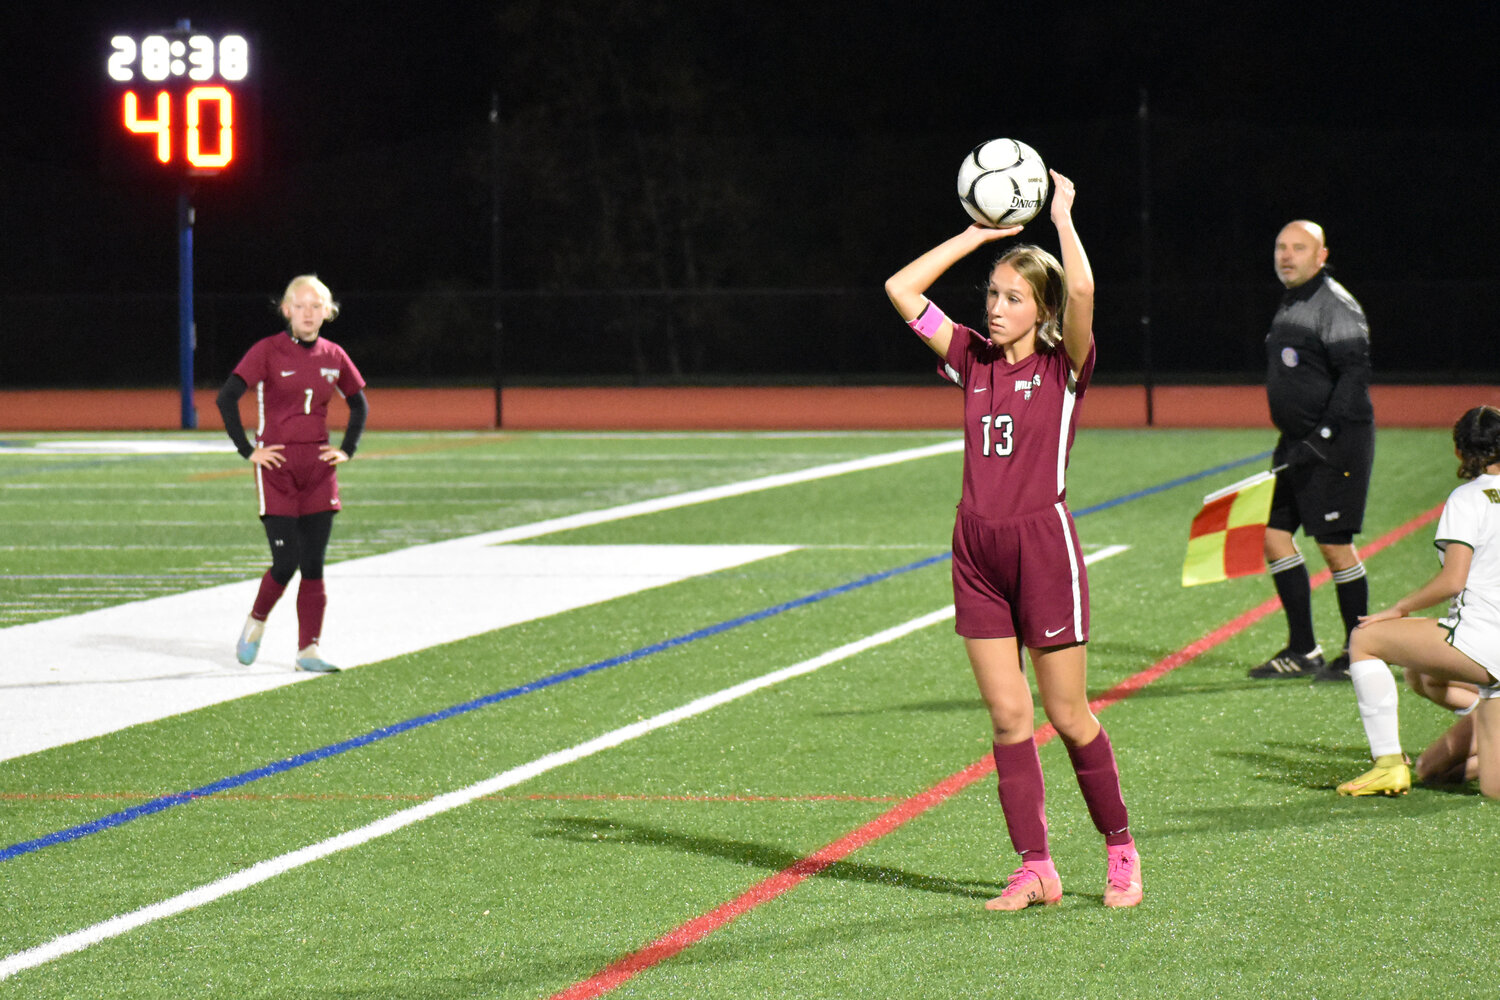 Athena Niforatos had two assists in the win. As one of the team captains, Niforatos would read the defense and position the Lady Wildcats before throwing the ball.